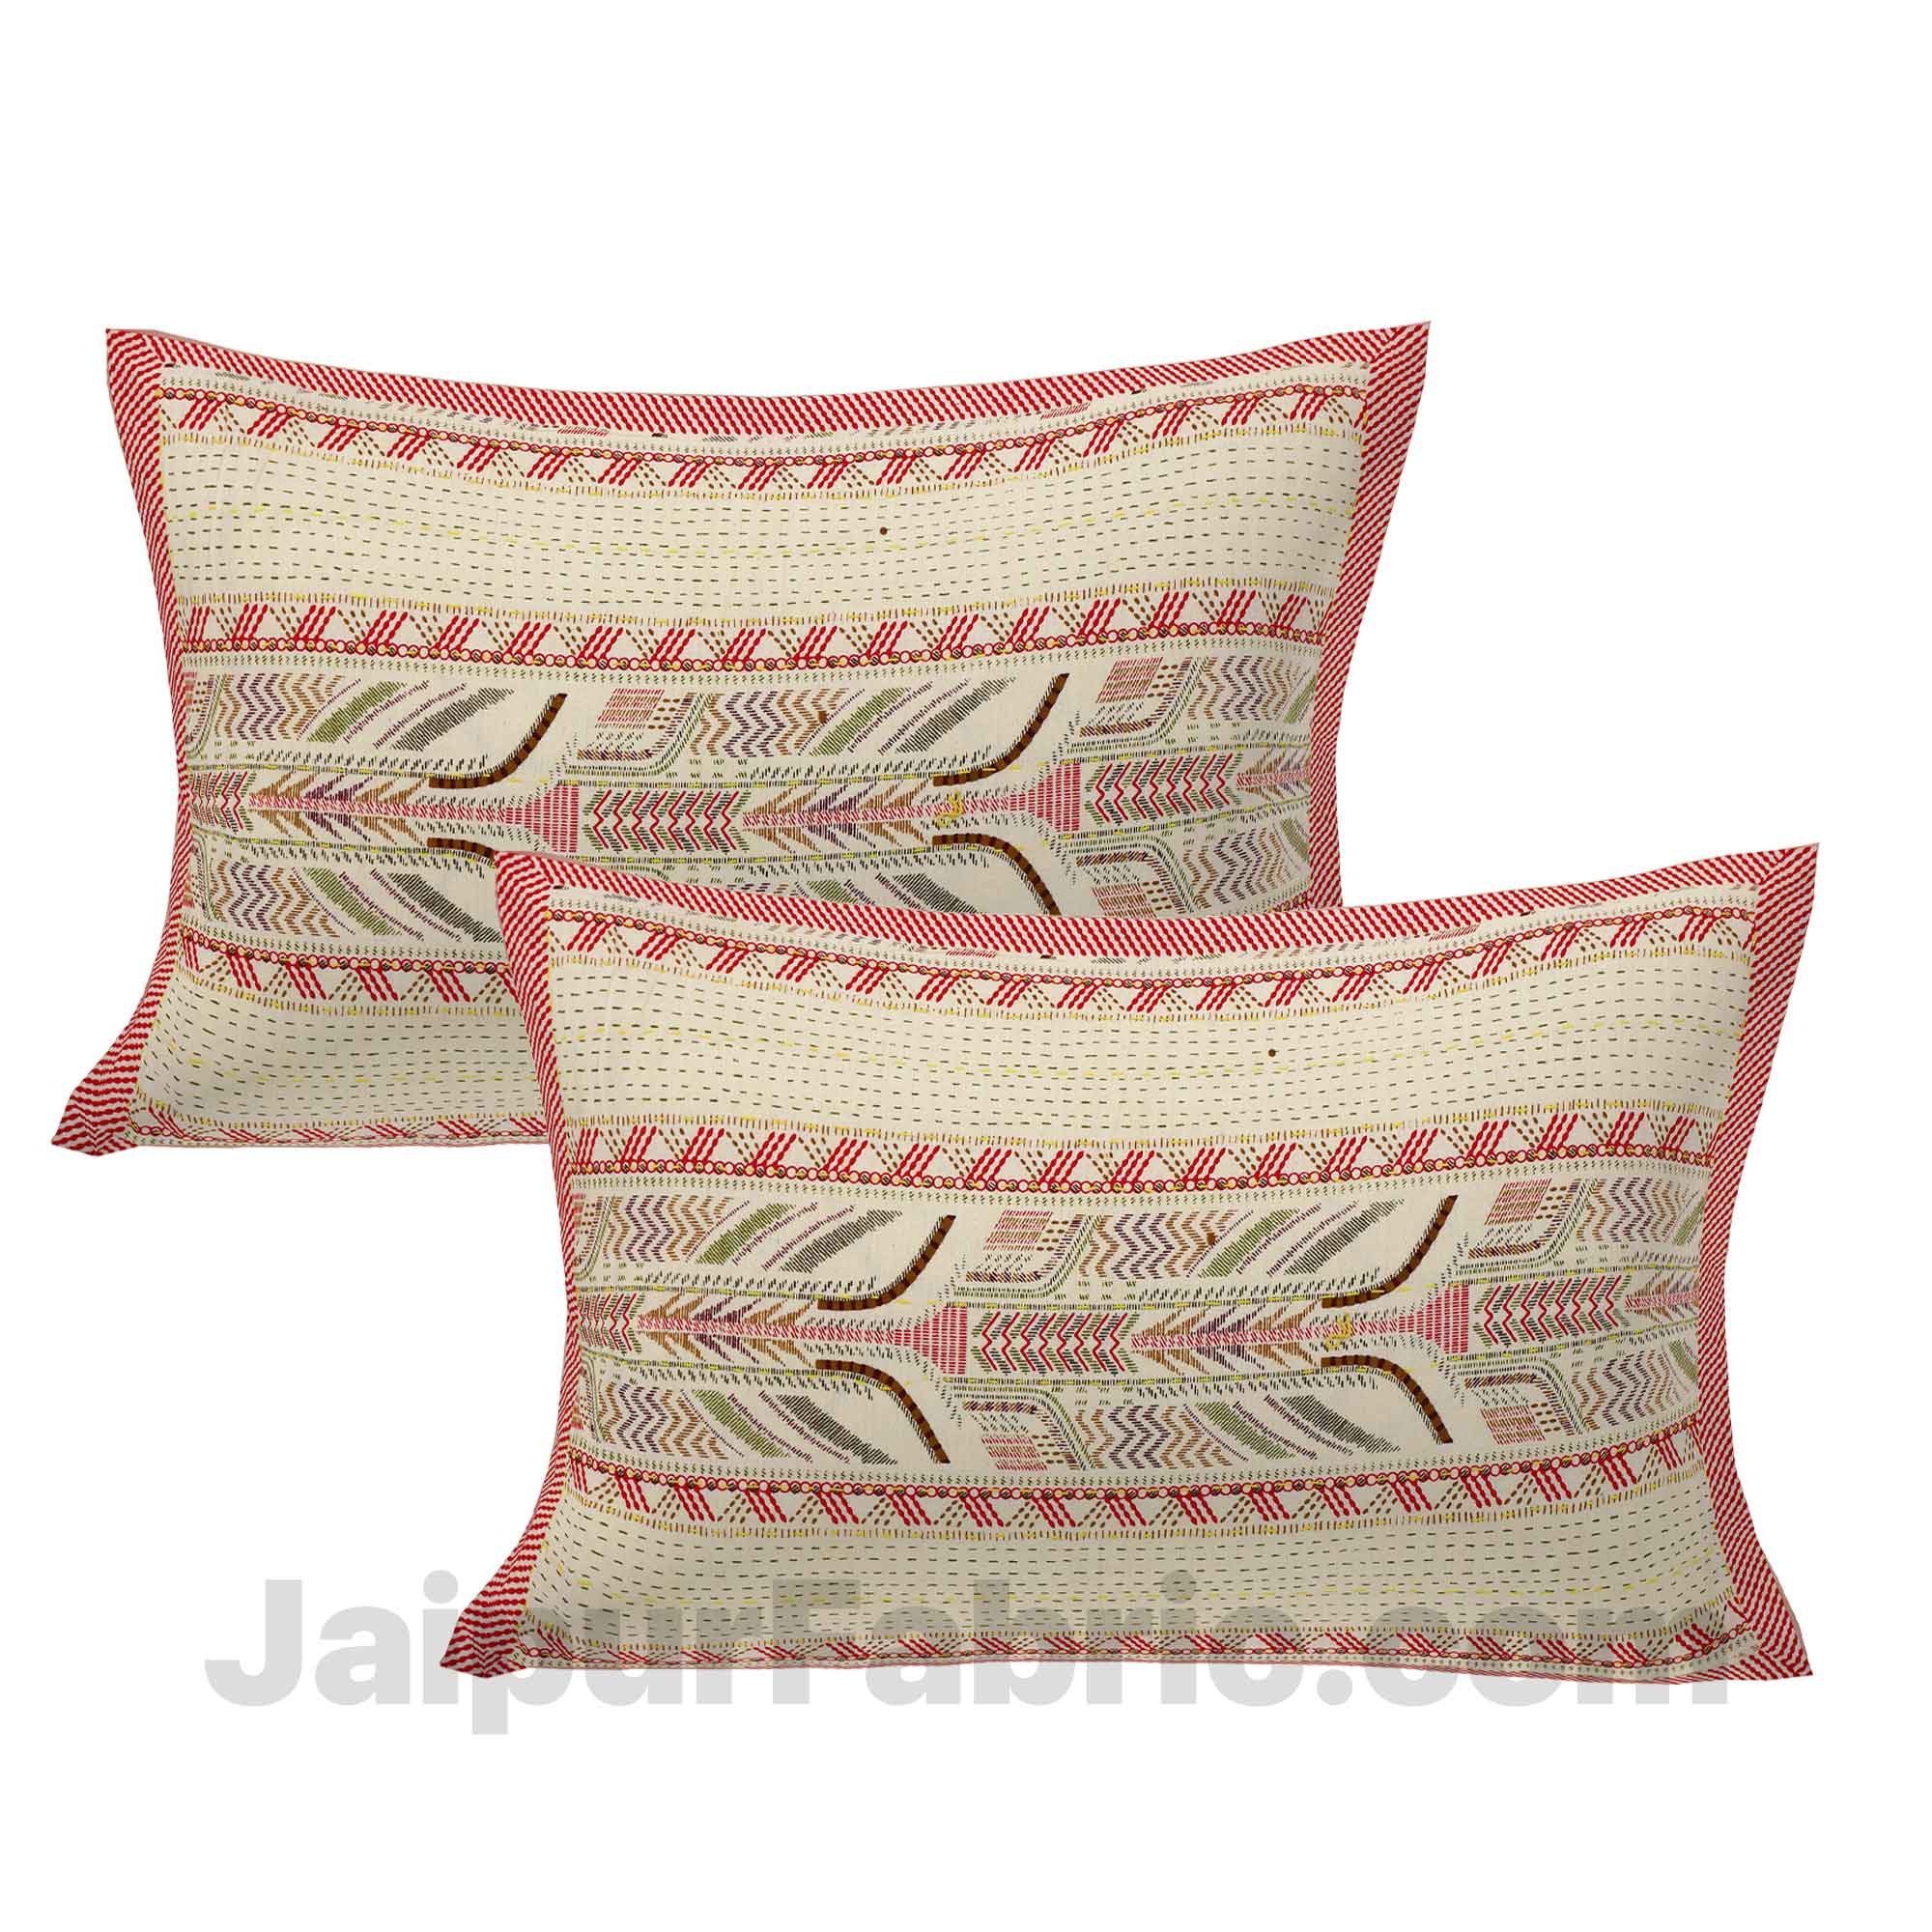 Creamish Red Lineal Style Kantha Thread Work Embroidery Double Bedsheet / Dohar / Light Blanket / Thin Comforter